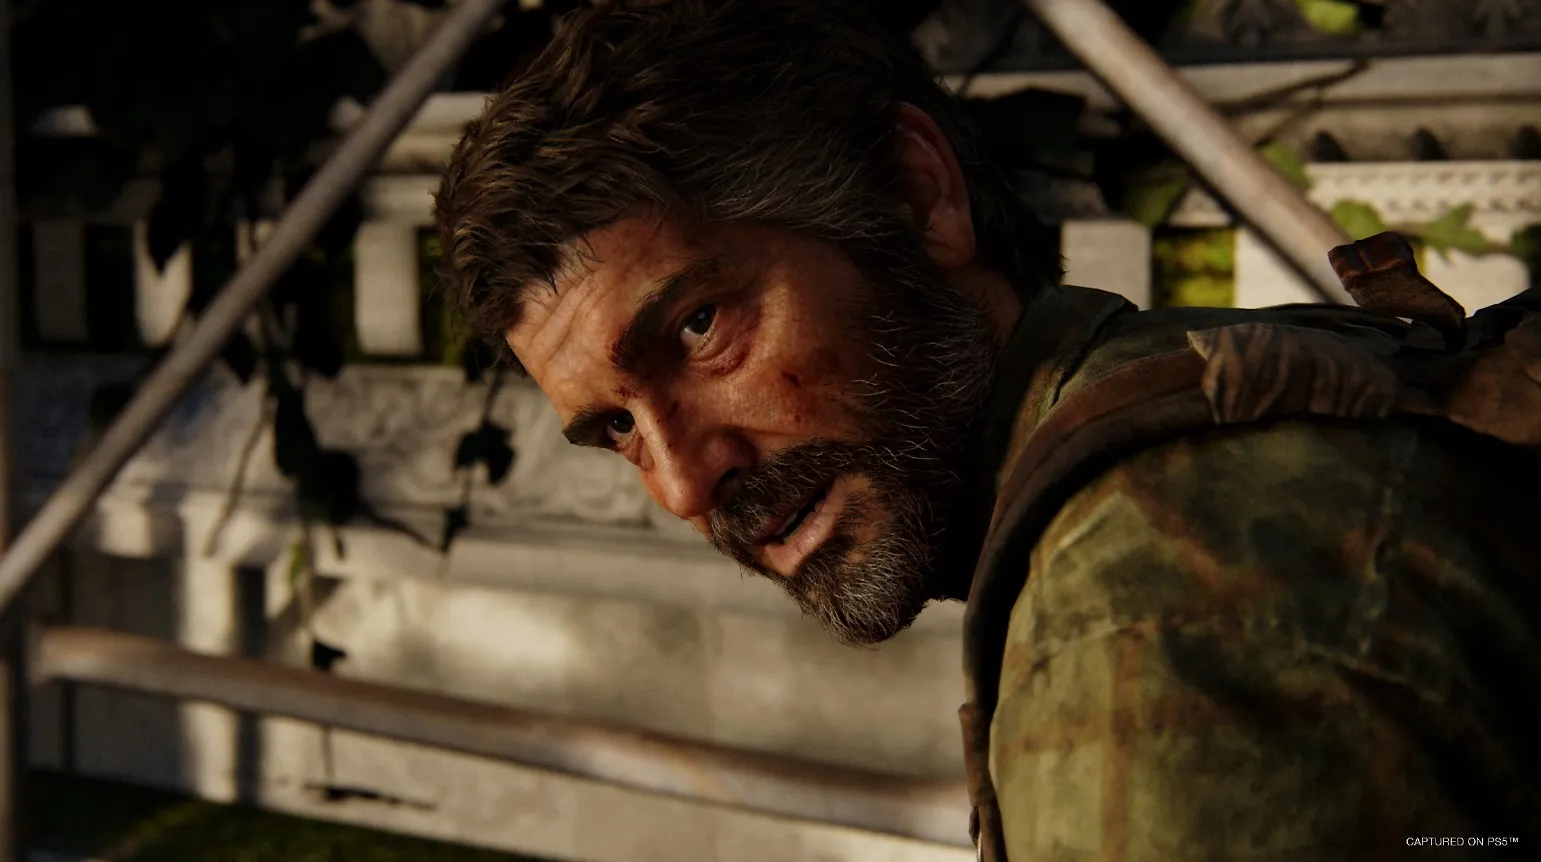 Naughty Dog's co-president will retire after 25 years at the studio